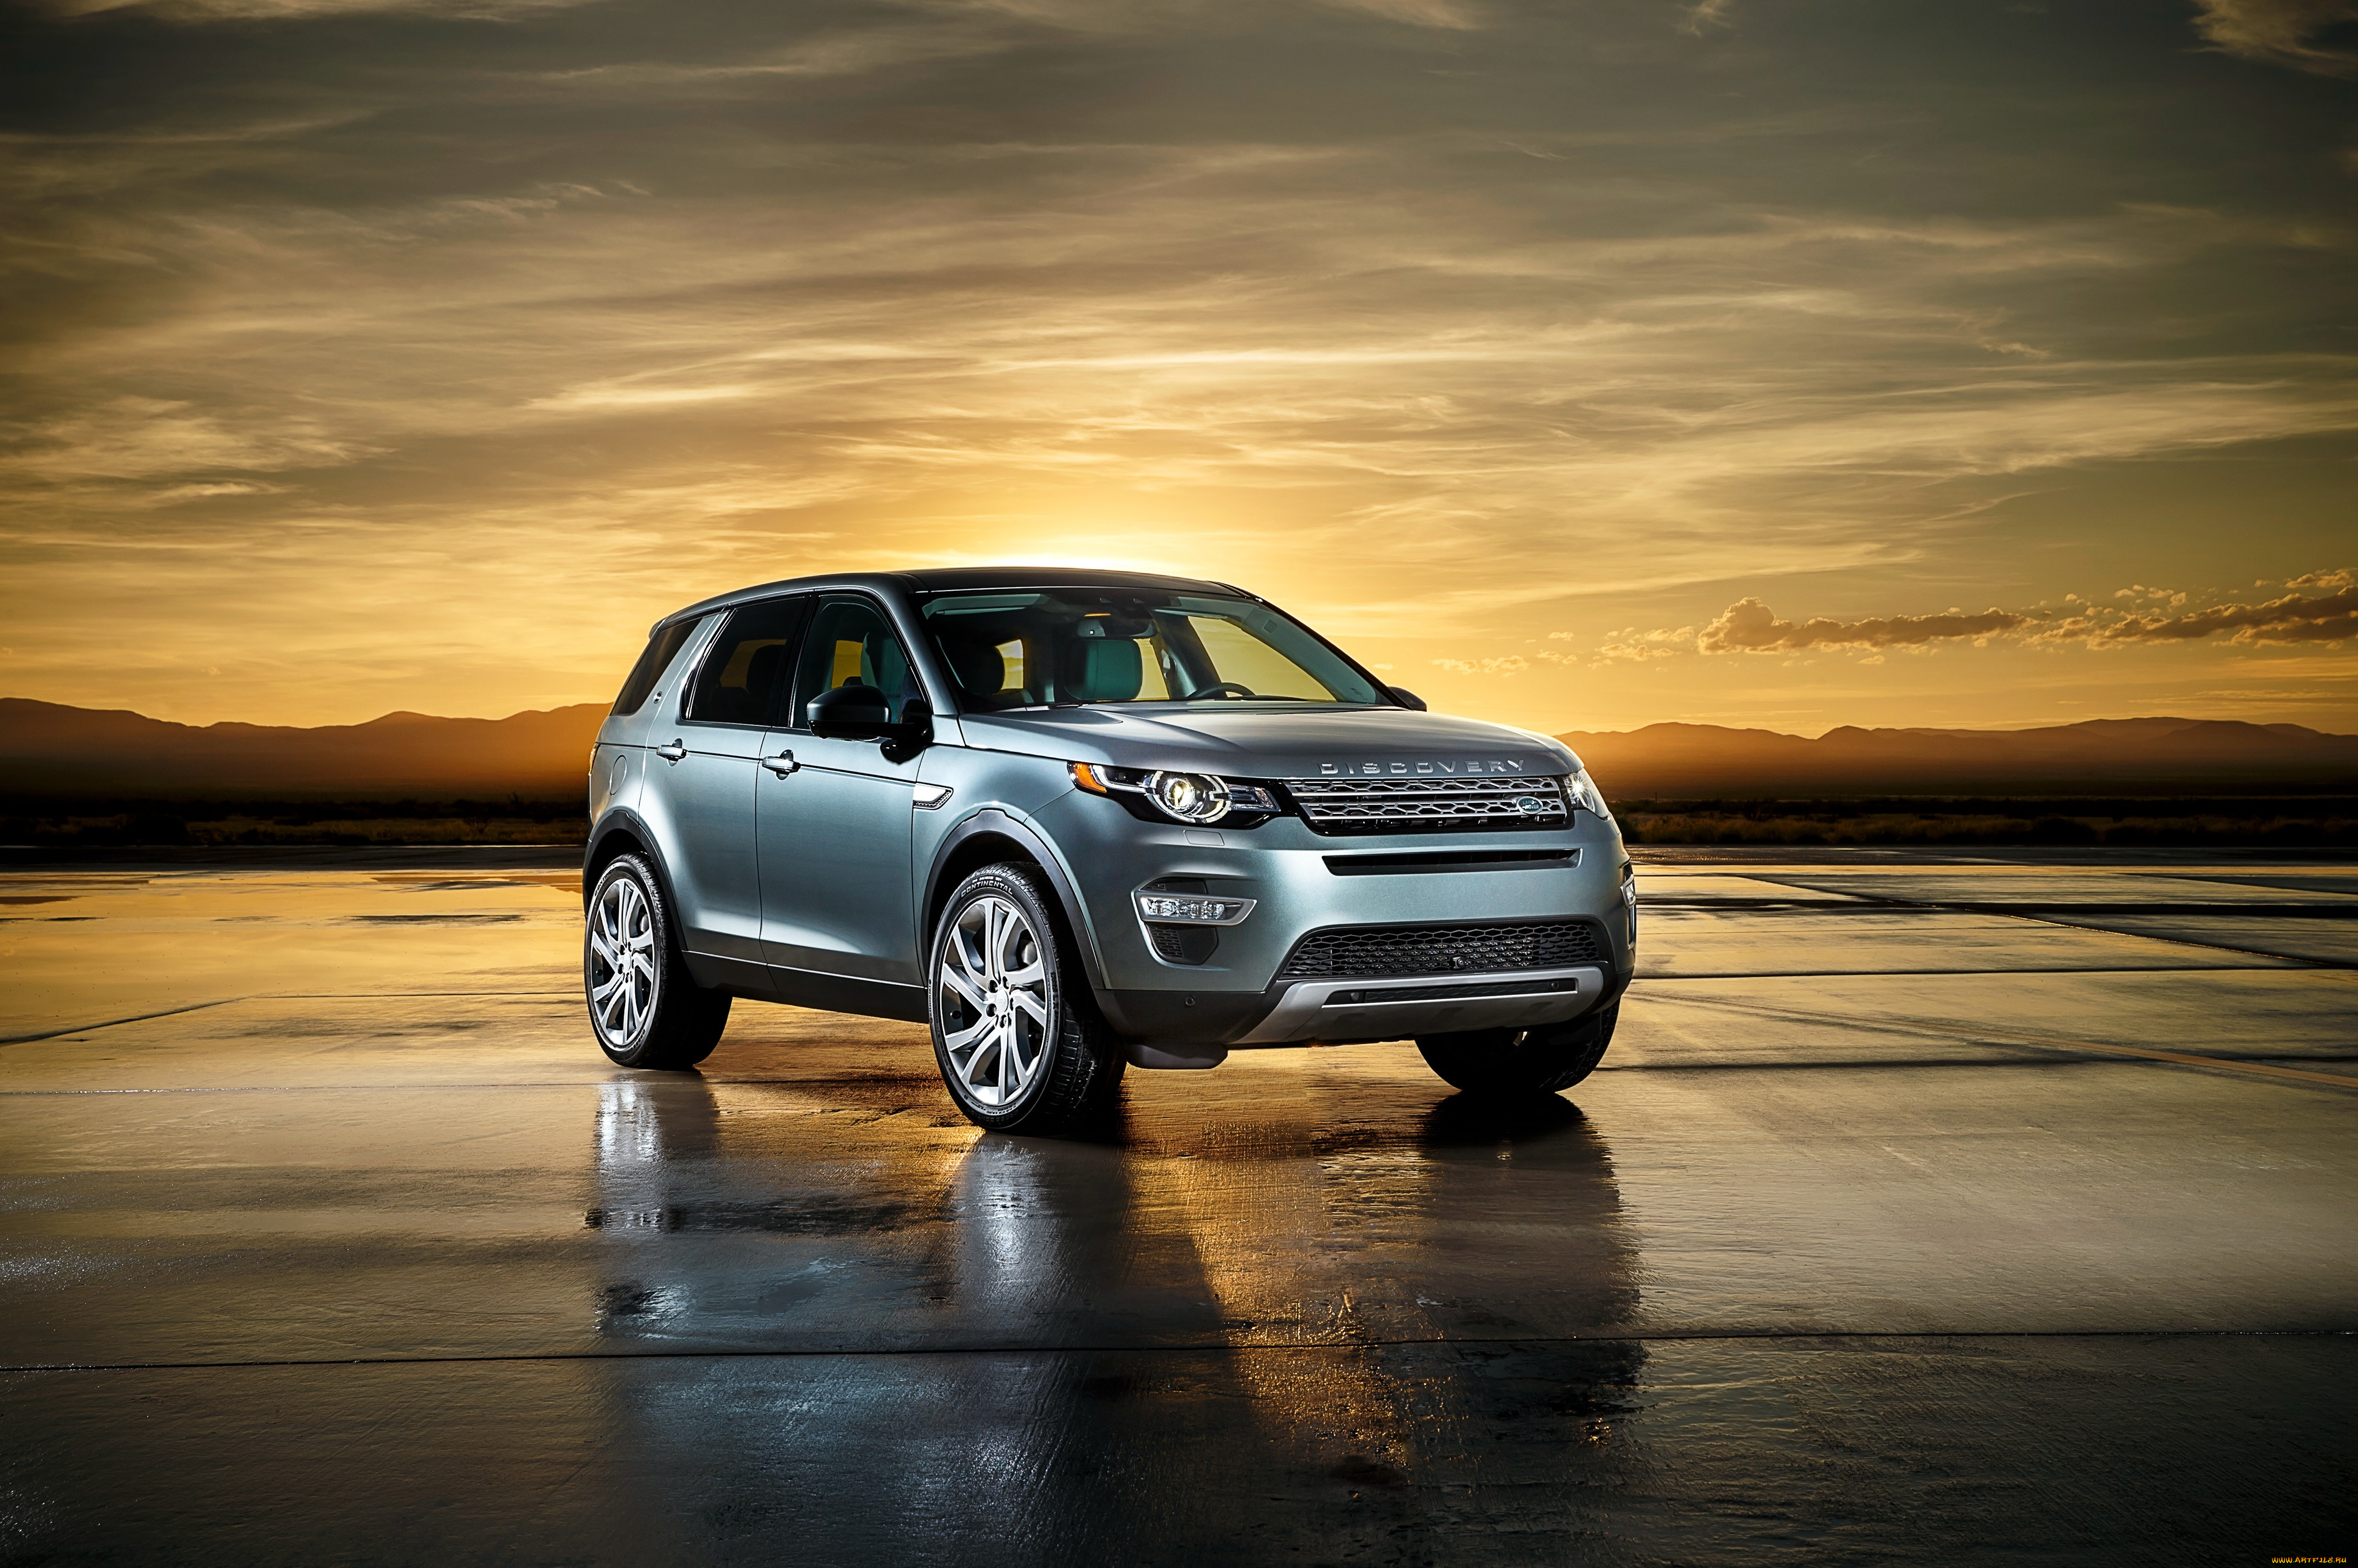 Land rover sport 2015. Land Rover Discovery Sport 2015. Ленд Ровер Дискавери 2015. Рендж Ровер Дискавери 2015. Discovery Sport l550.